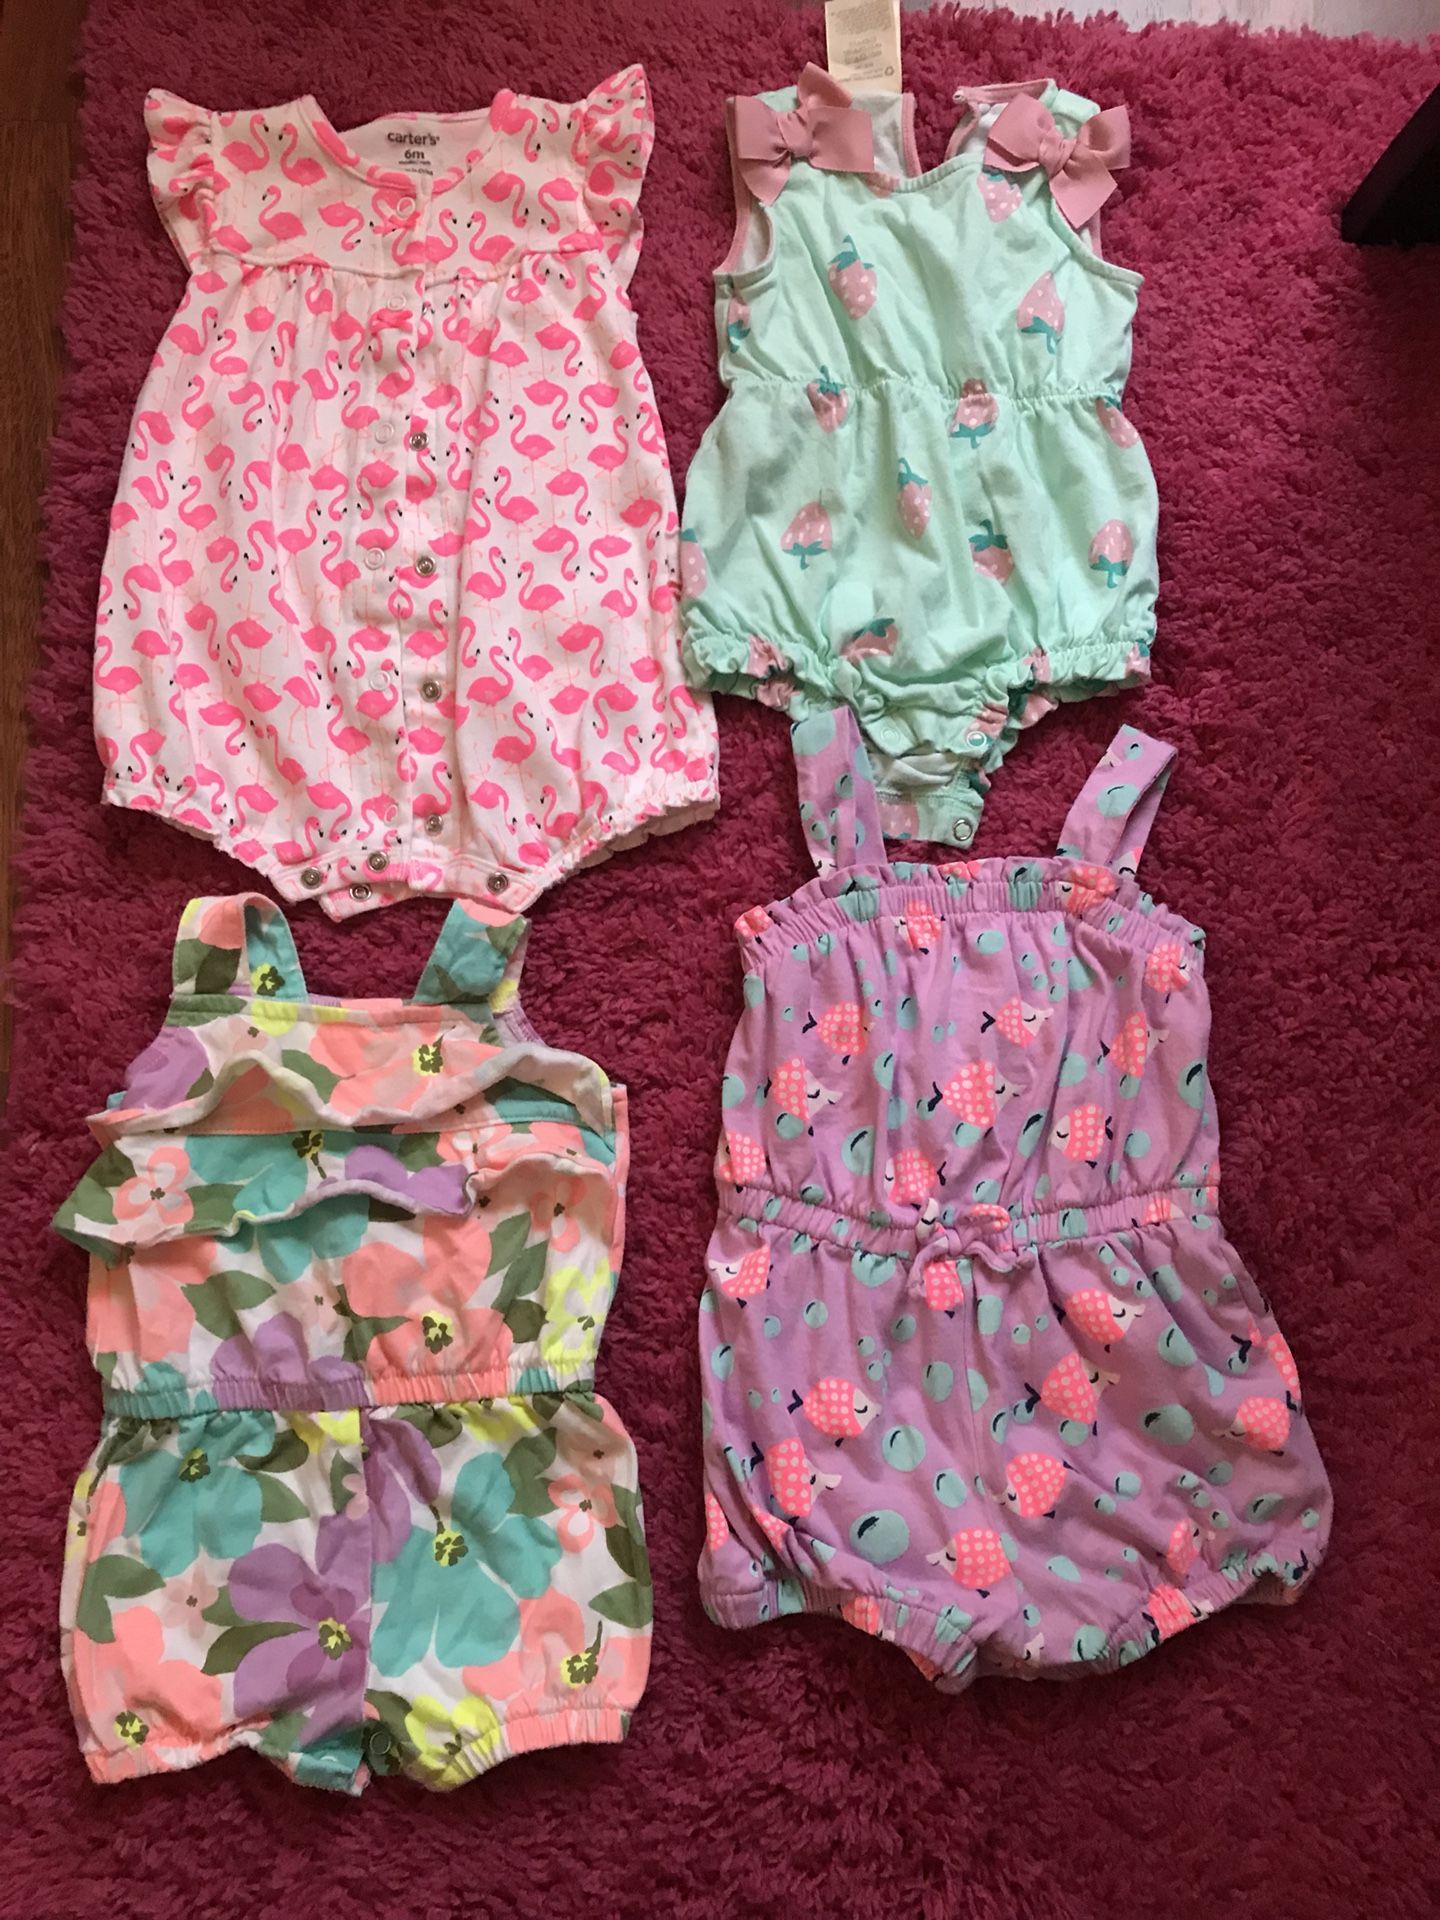 8 ROMPERS FOR BABYGIRL.